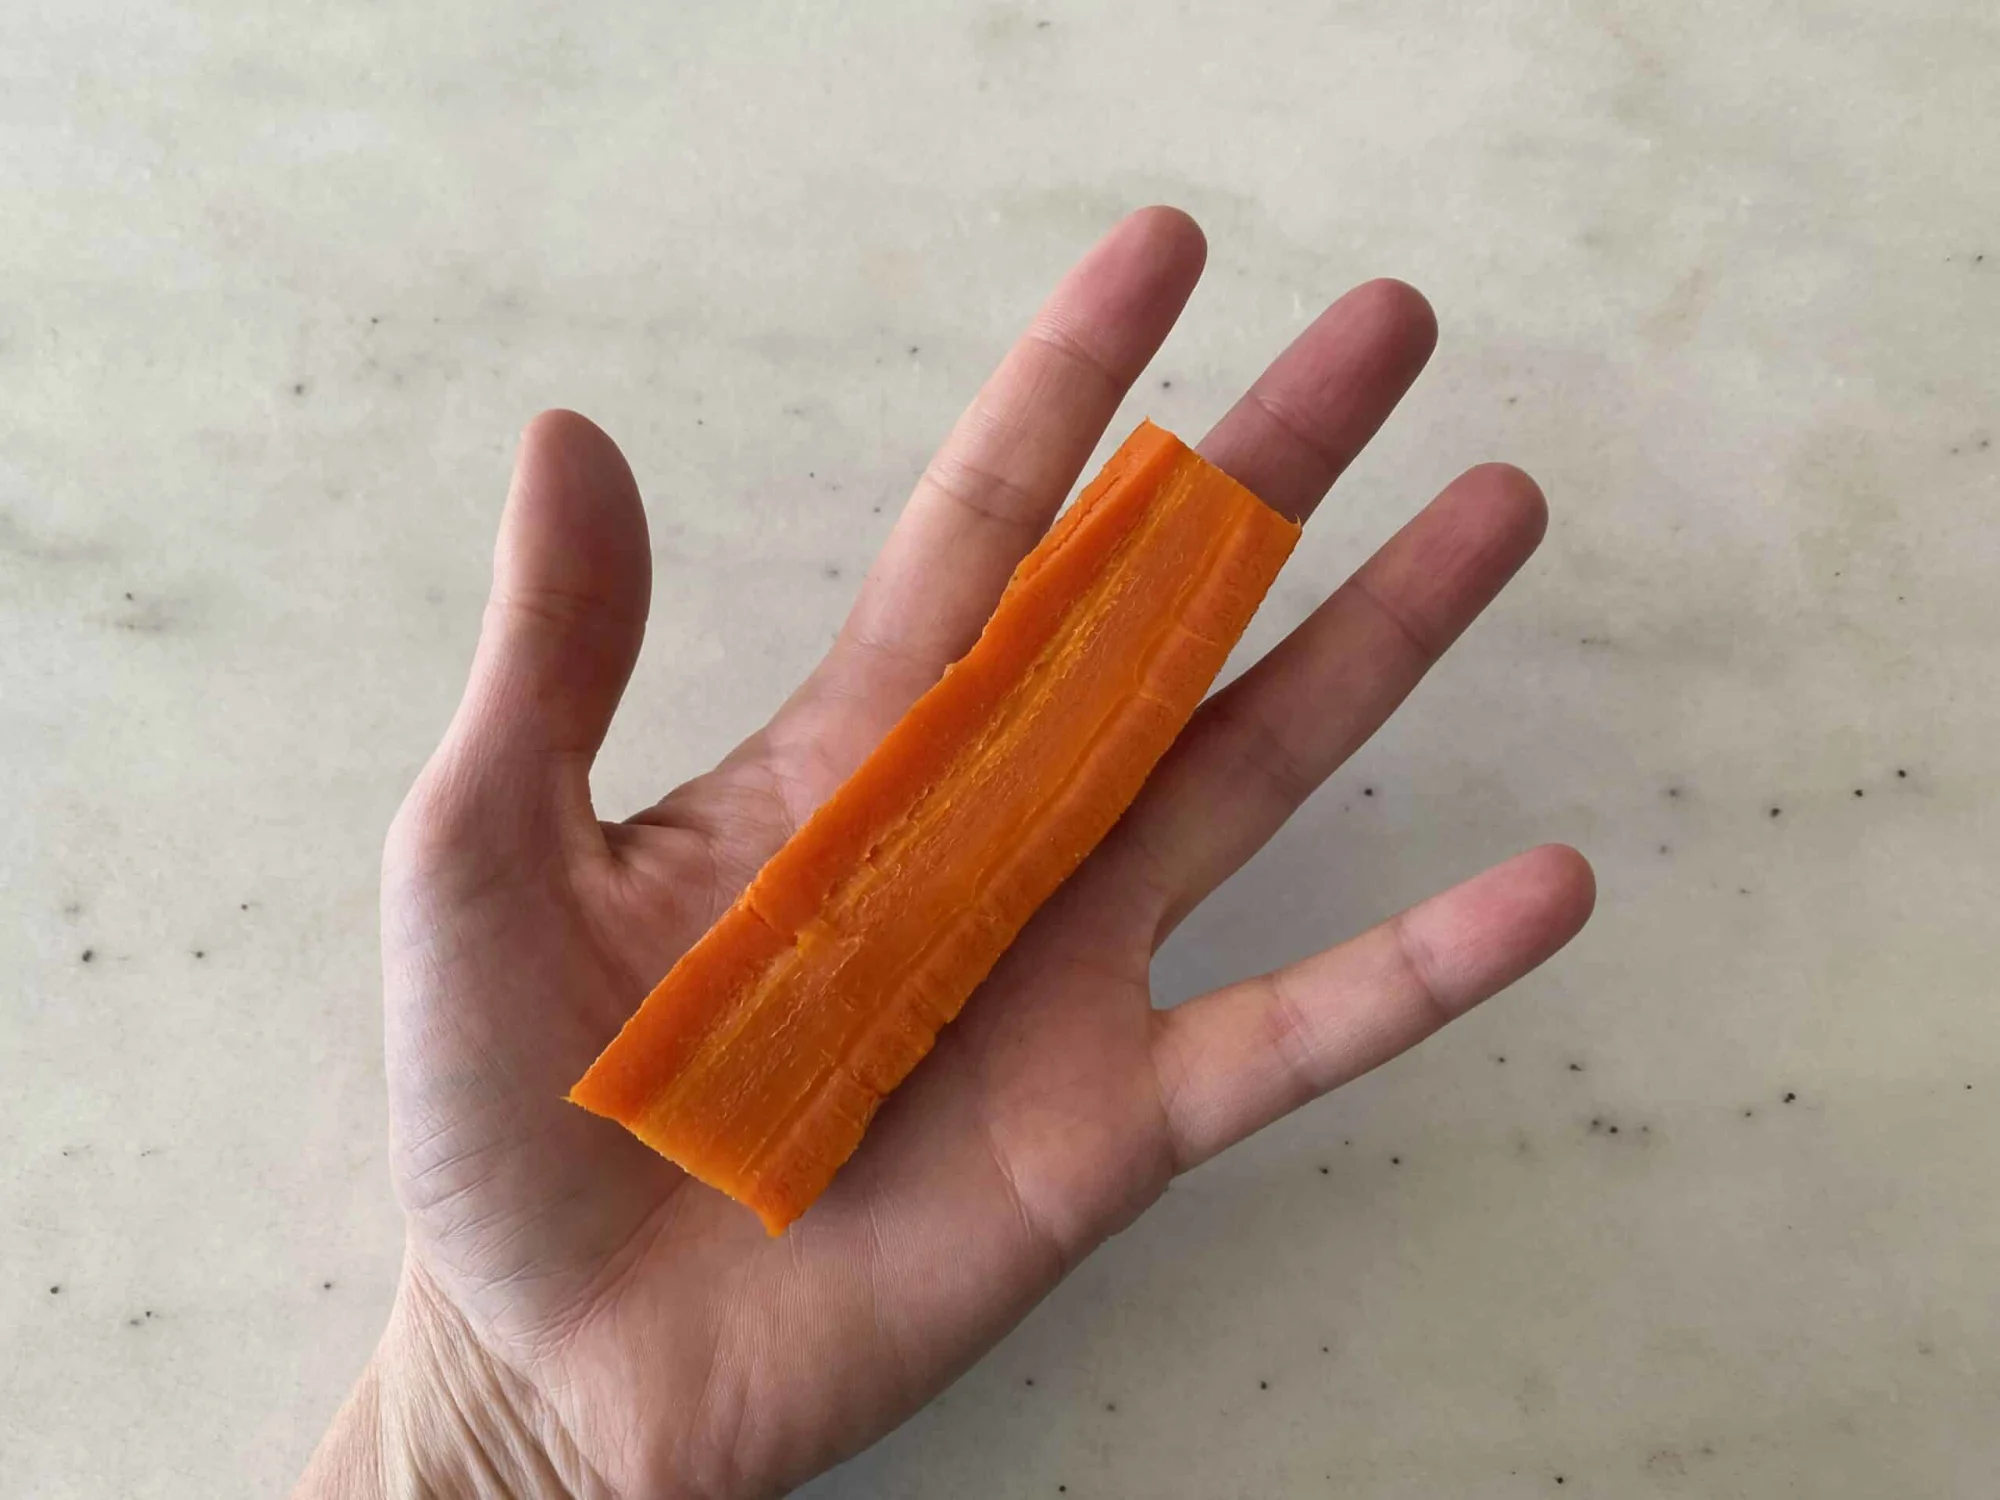 a hand holding a cooked carrot cut in half lengthwise for babies 6 months+